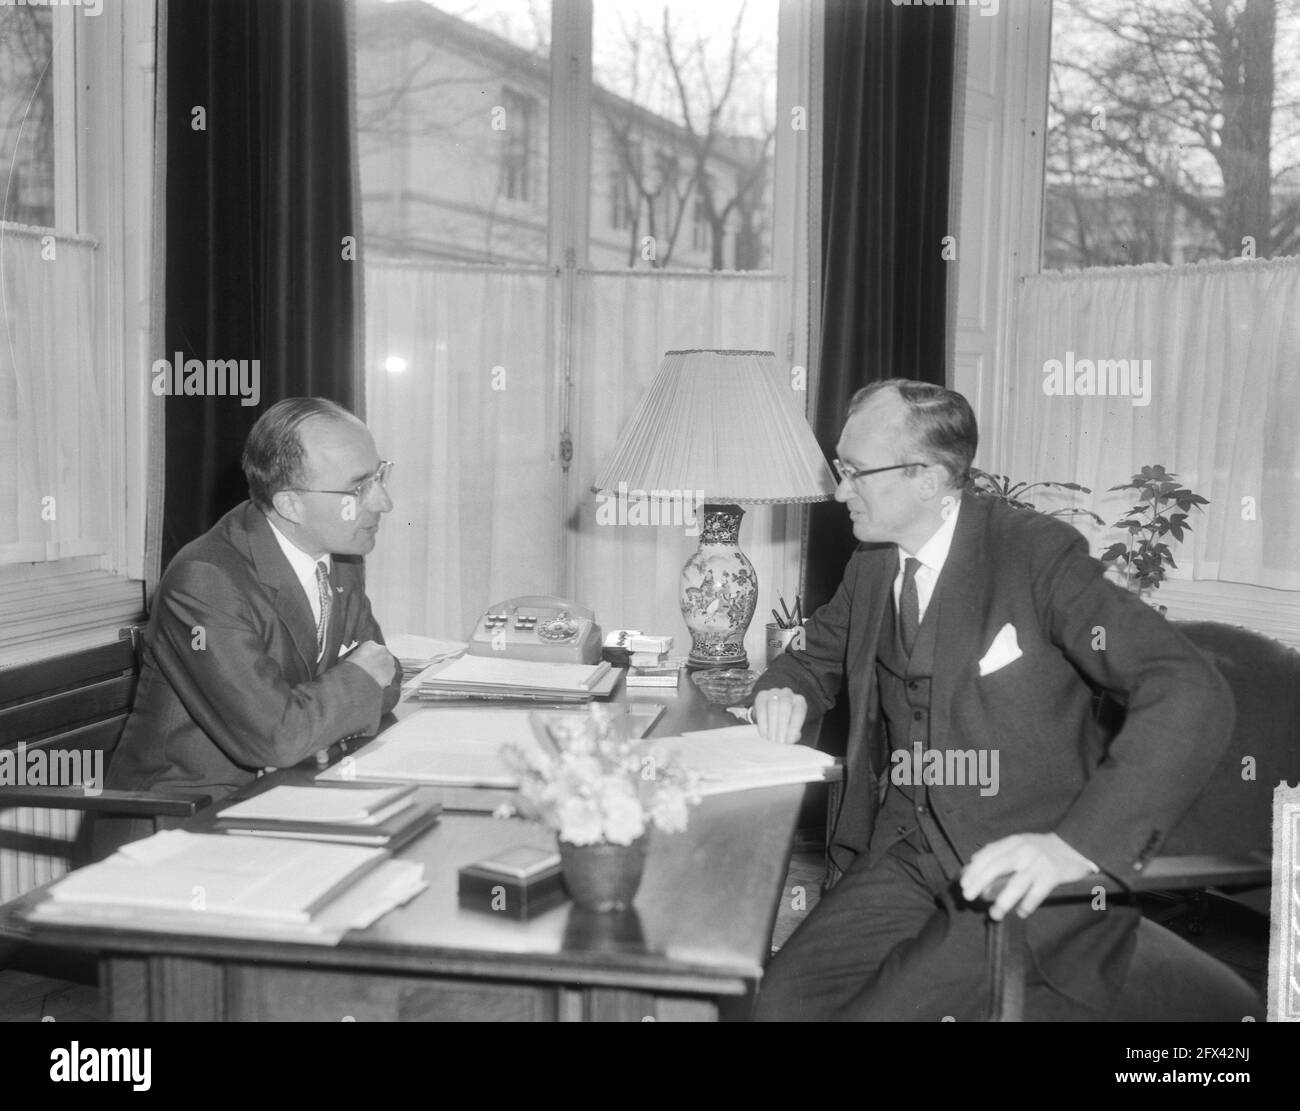 The Cabinet Crisis, Mr. Cals and Minister Witteveen, March 17, 1965, KABINETSCRIS, The Netherlands, 20th century press agency photo, news to remember, documentary, historic photography 1945-1990, visual stories, human history of the Twentieth Century, capturing moments in time Stock Photo